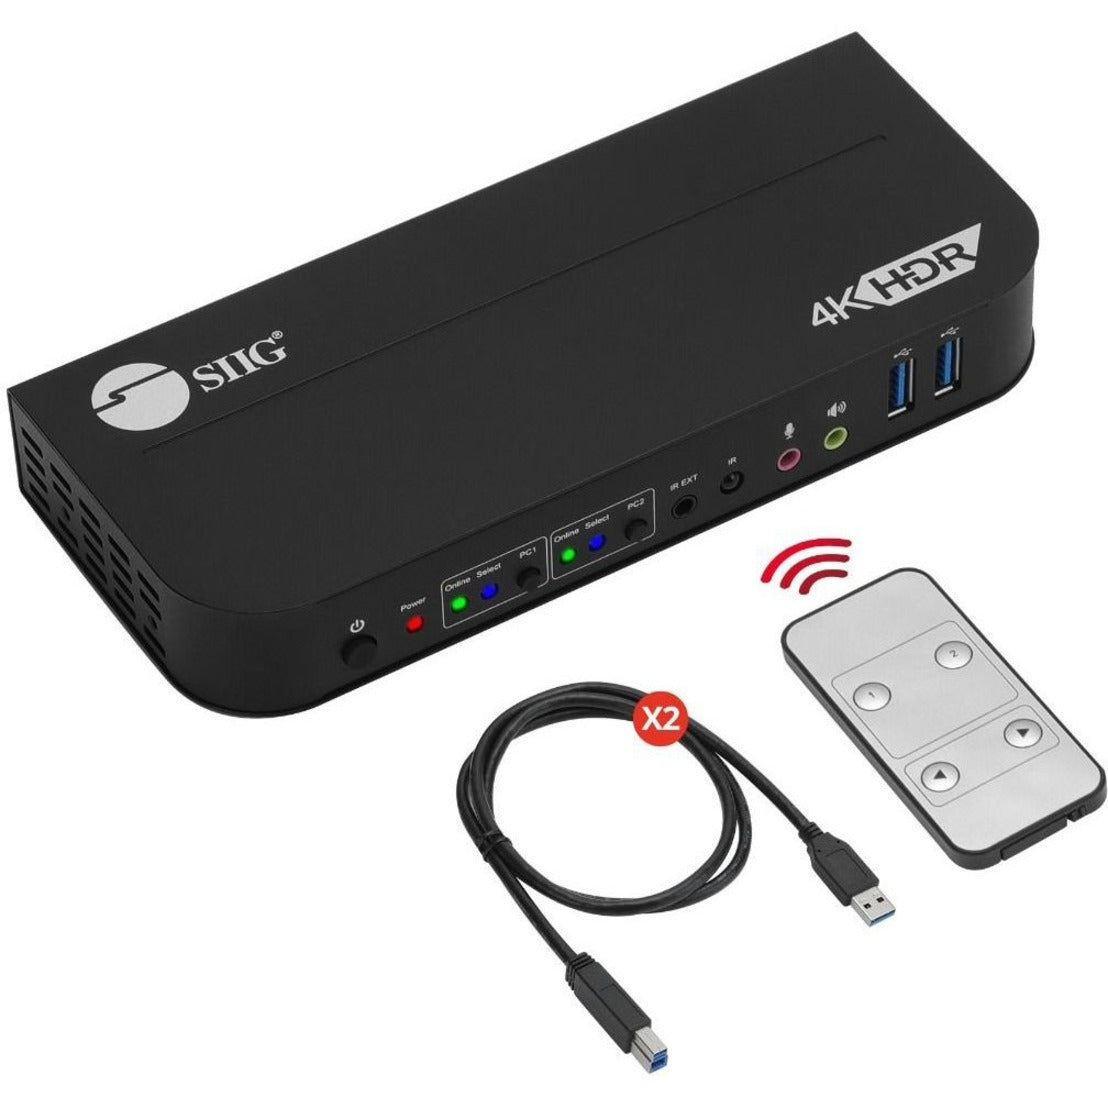 SIIG CE-KV0E11-S1 2x1 HDMI 4K HDR KVM USB 3.0 Switch with Remote Control, Plug and Play